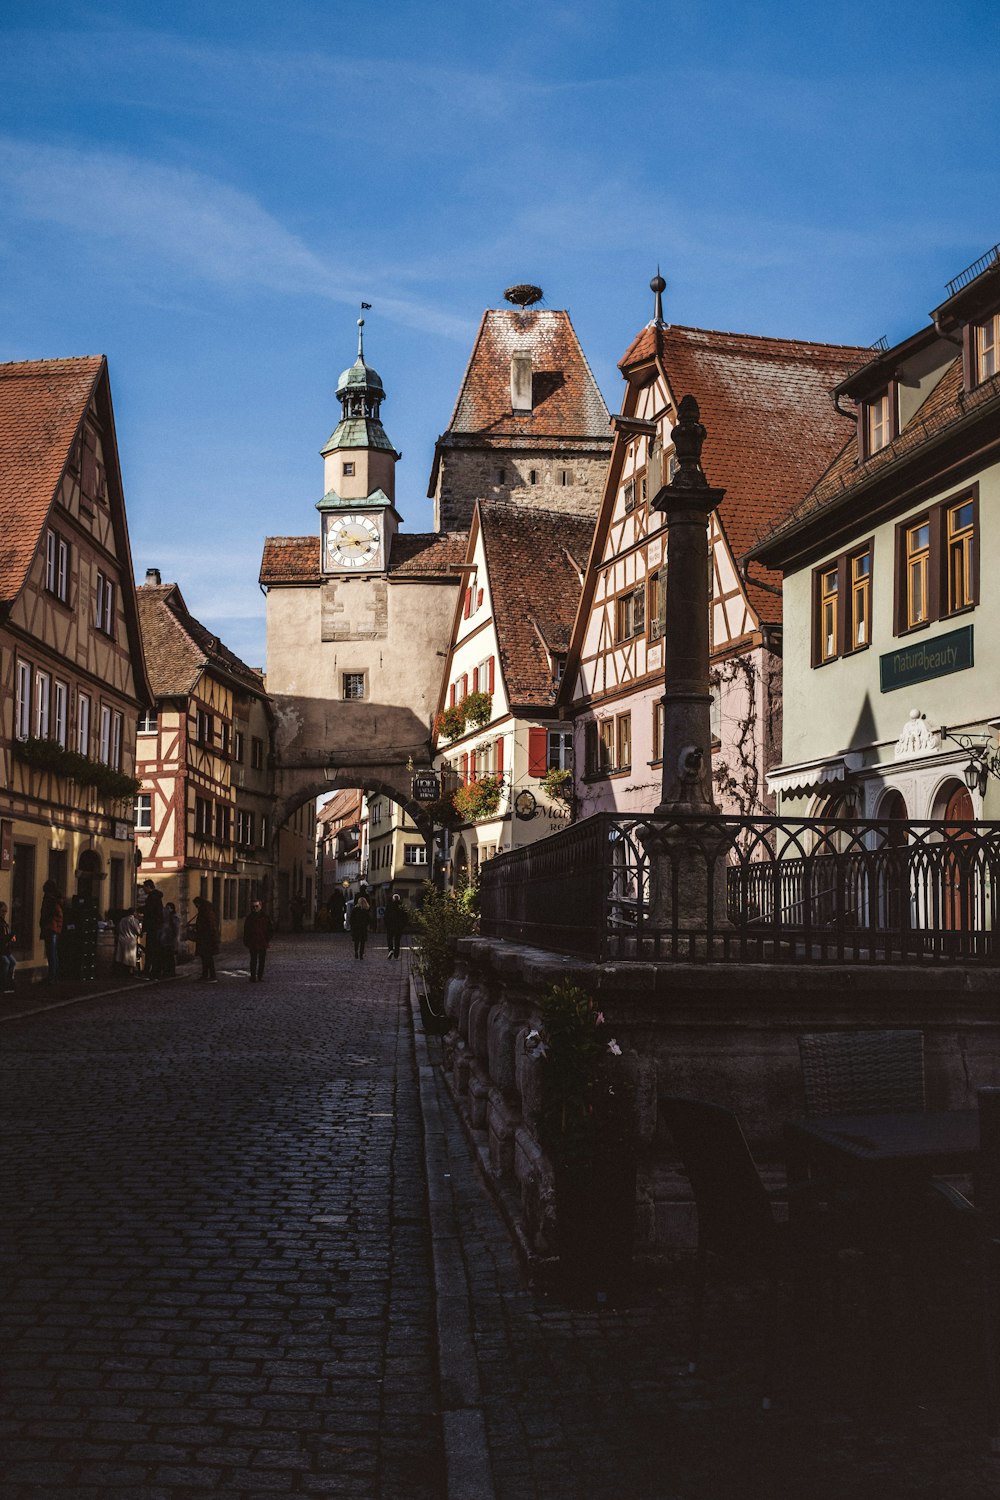 a cobblestone street lined with buildings and a clock tower